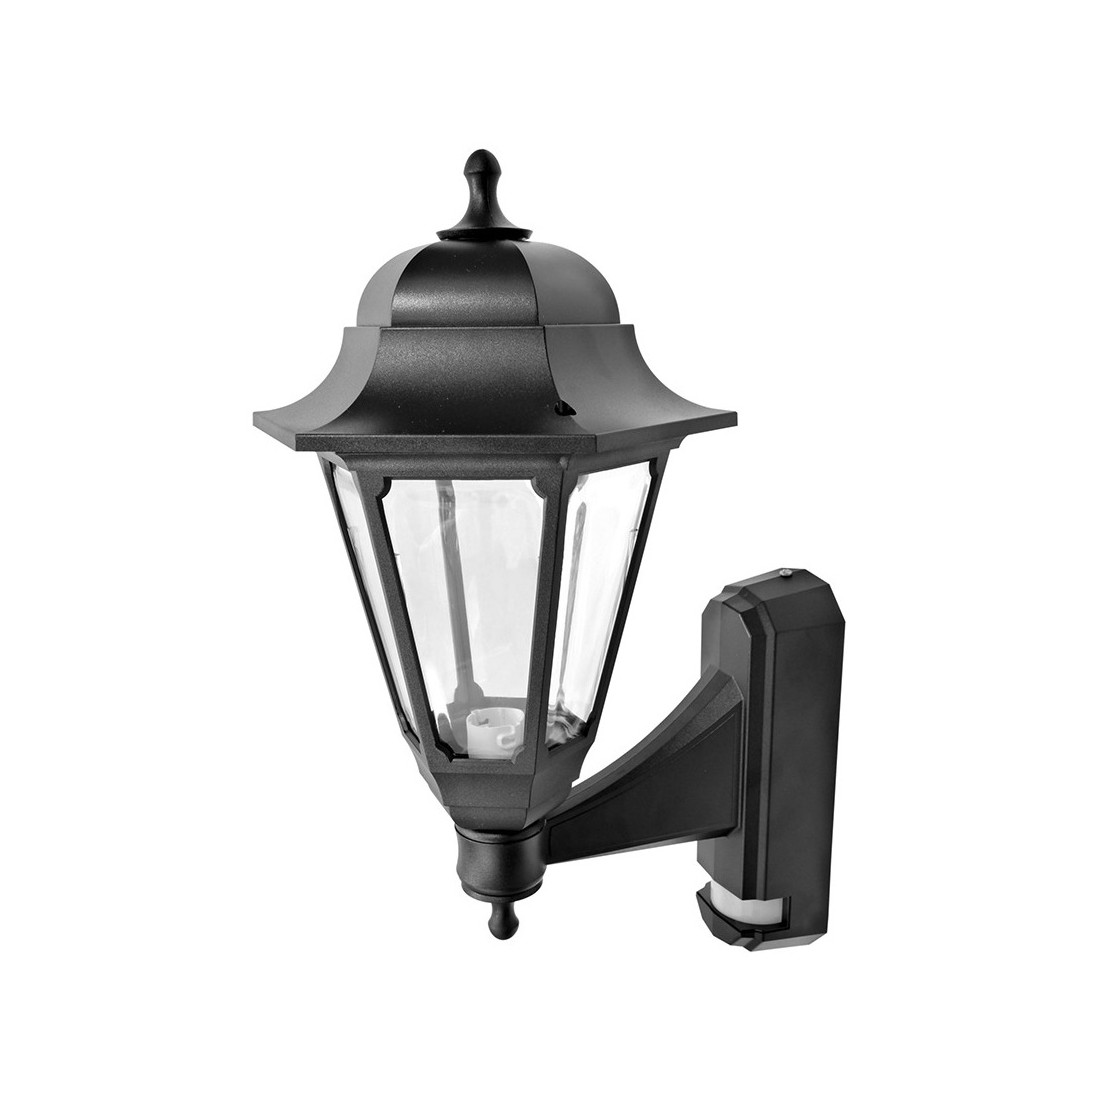 ASD Lighting CL/BK100C Black All Polycarbonate Security Coach Lantern With  Dusk-To-Dawn Photocell & Clear Diffuser - Requires Lamp IP44 100W BC 240V  Height: 380mm | Width: 170mm | Proj: 252mm - Internet